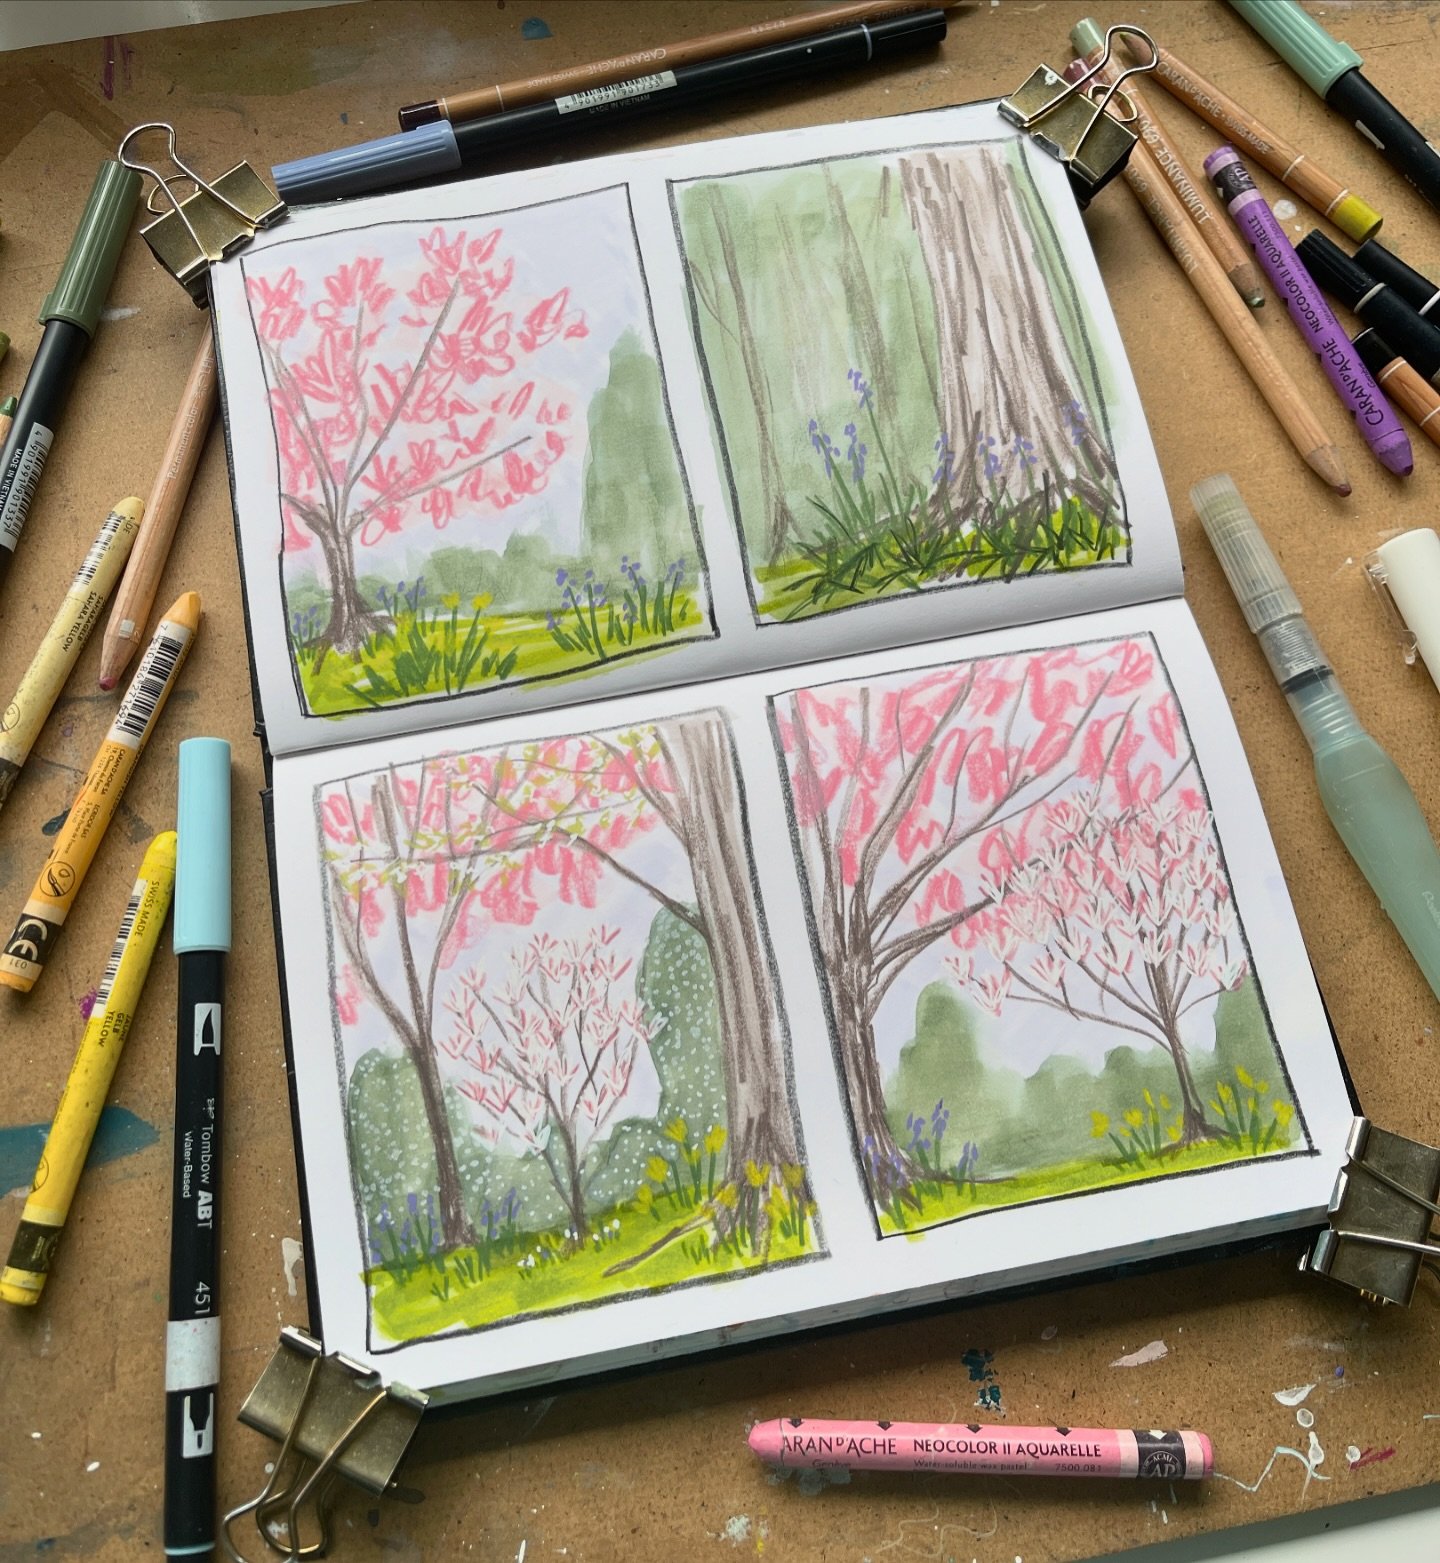 I&rsquo;m sharing a fun new art challenge on the Creative Practice Tier of the Patreon today!

We&rsquo;re making Spring Dreamscapes - combining different Spring-related images in to our perfect Spring scenes 🌸

If you&rsquo;d like to join in with t